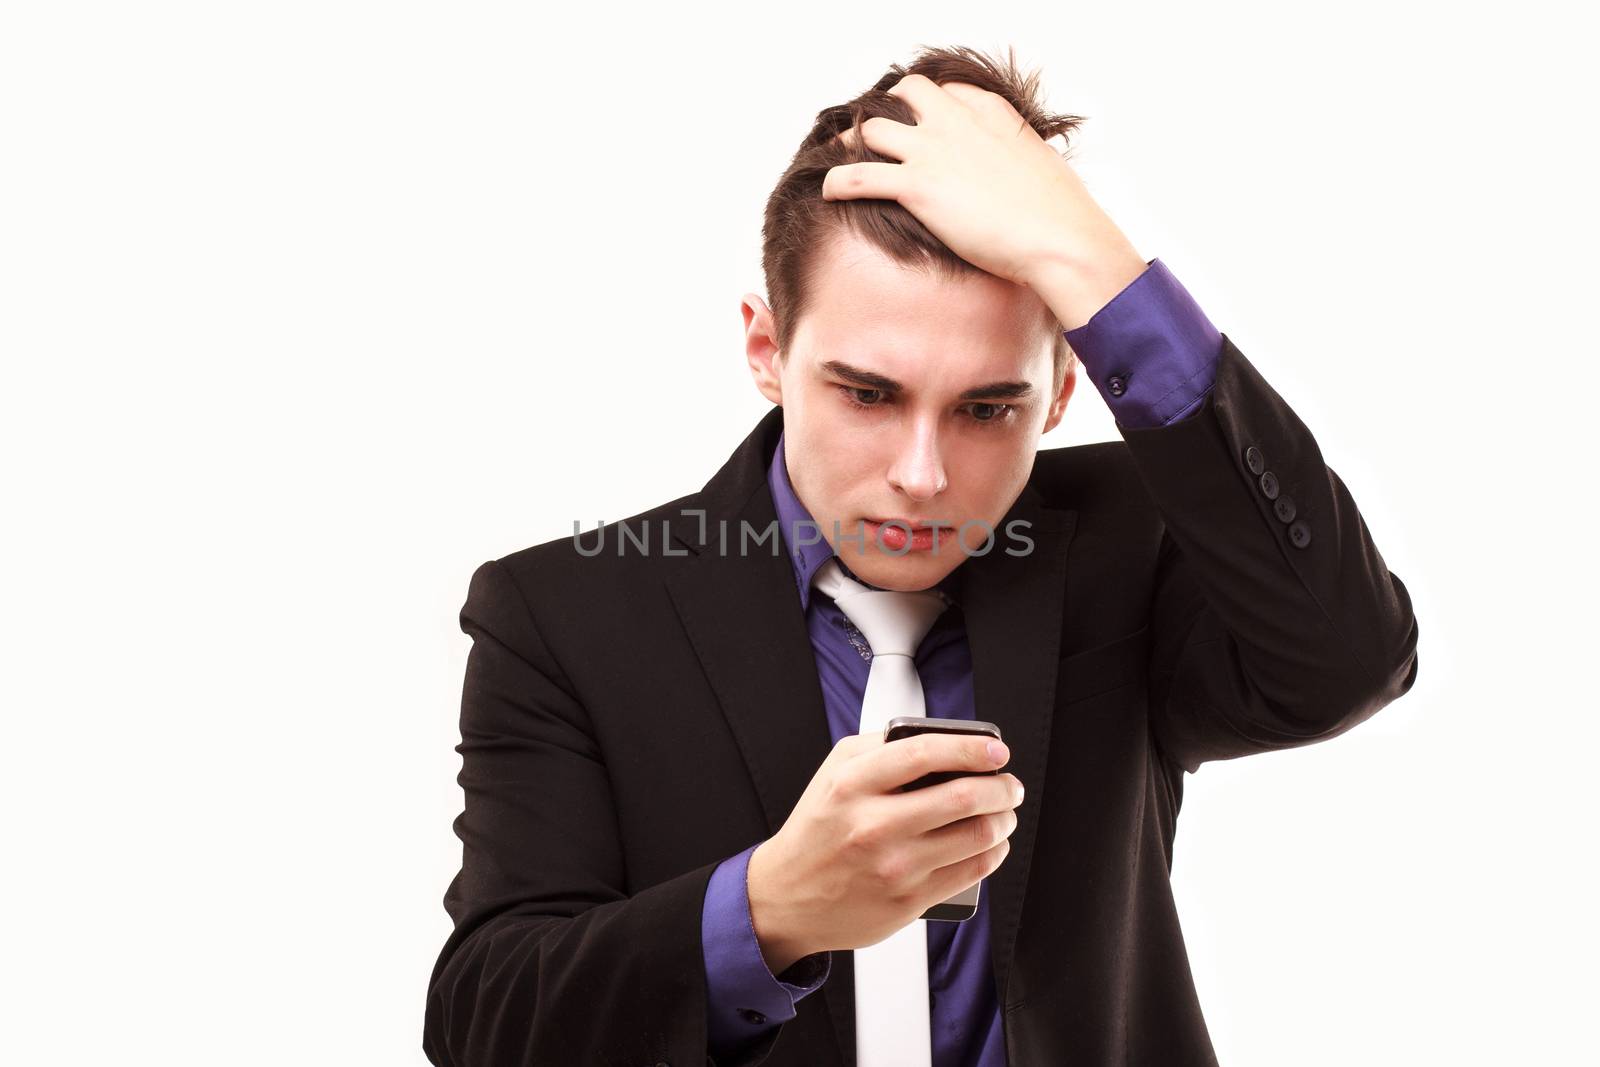 Young businessman amazedly
looking at the phone holding on to the head isolated on white